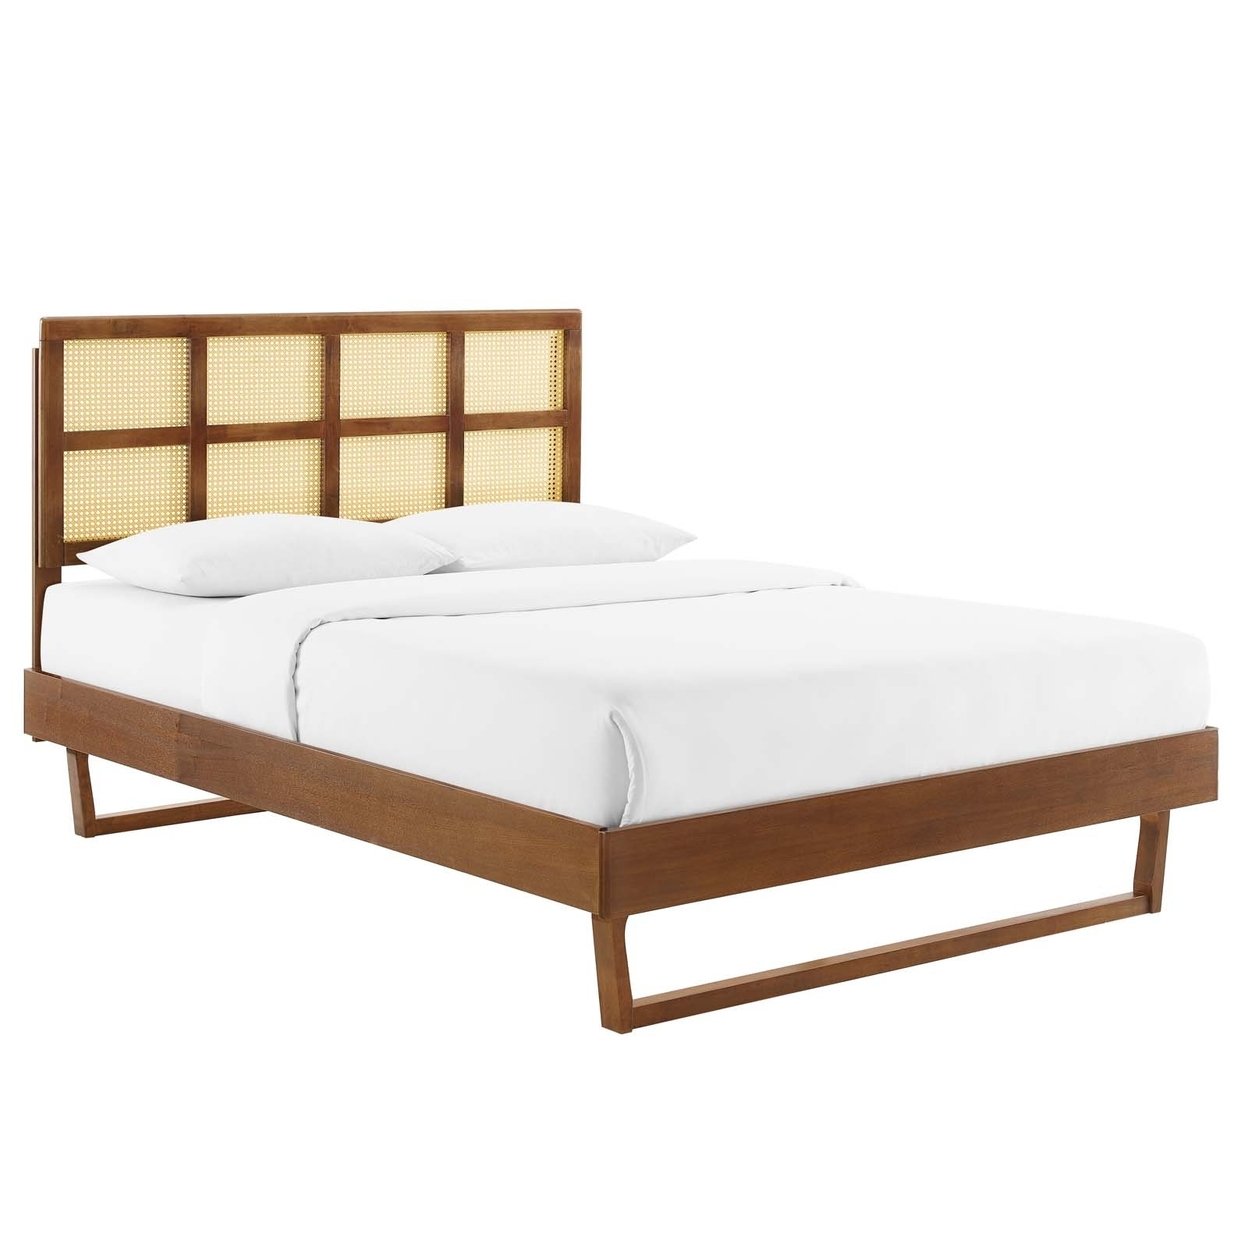 Sidney Cane And Wood Full Platform Bed With Angular Legs, Walnut